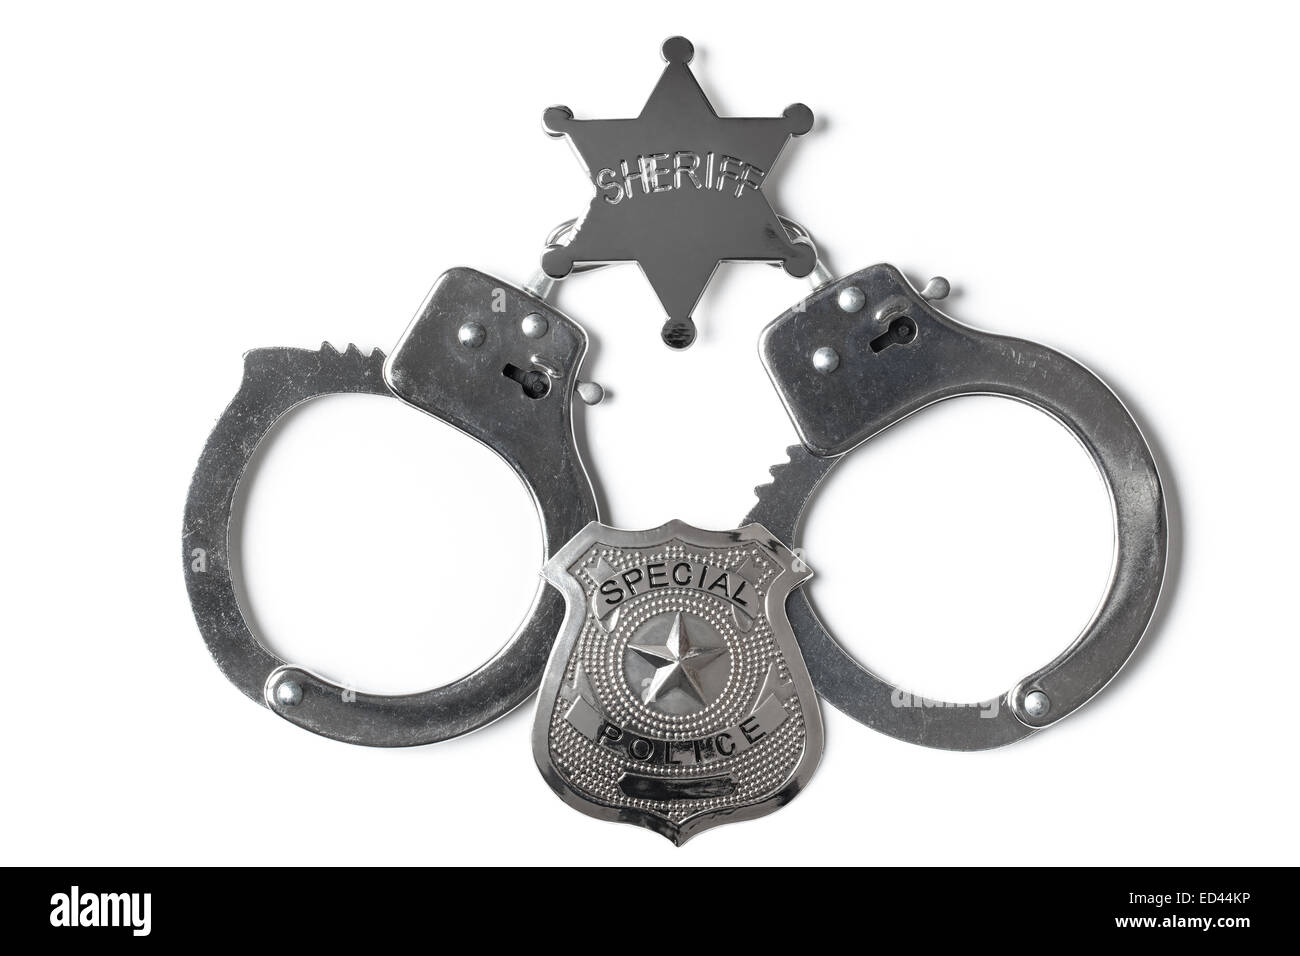 Sheriff star police badge and handcuffs isolated on white background Stock Photo